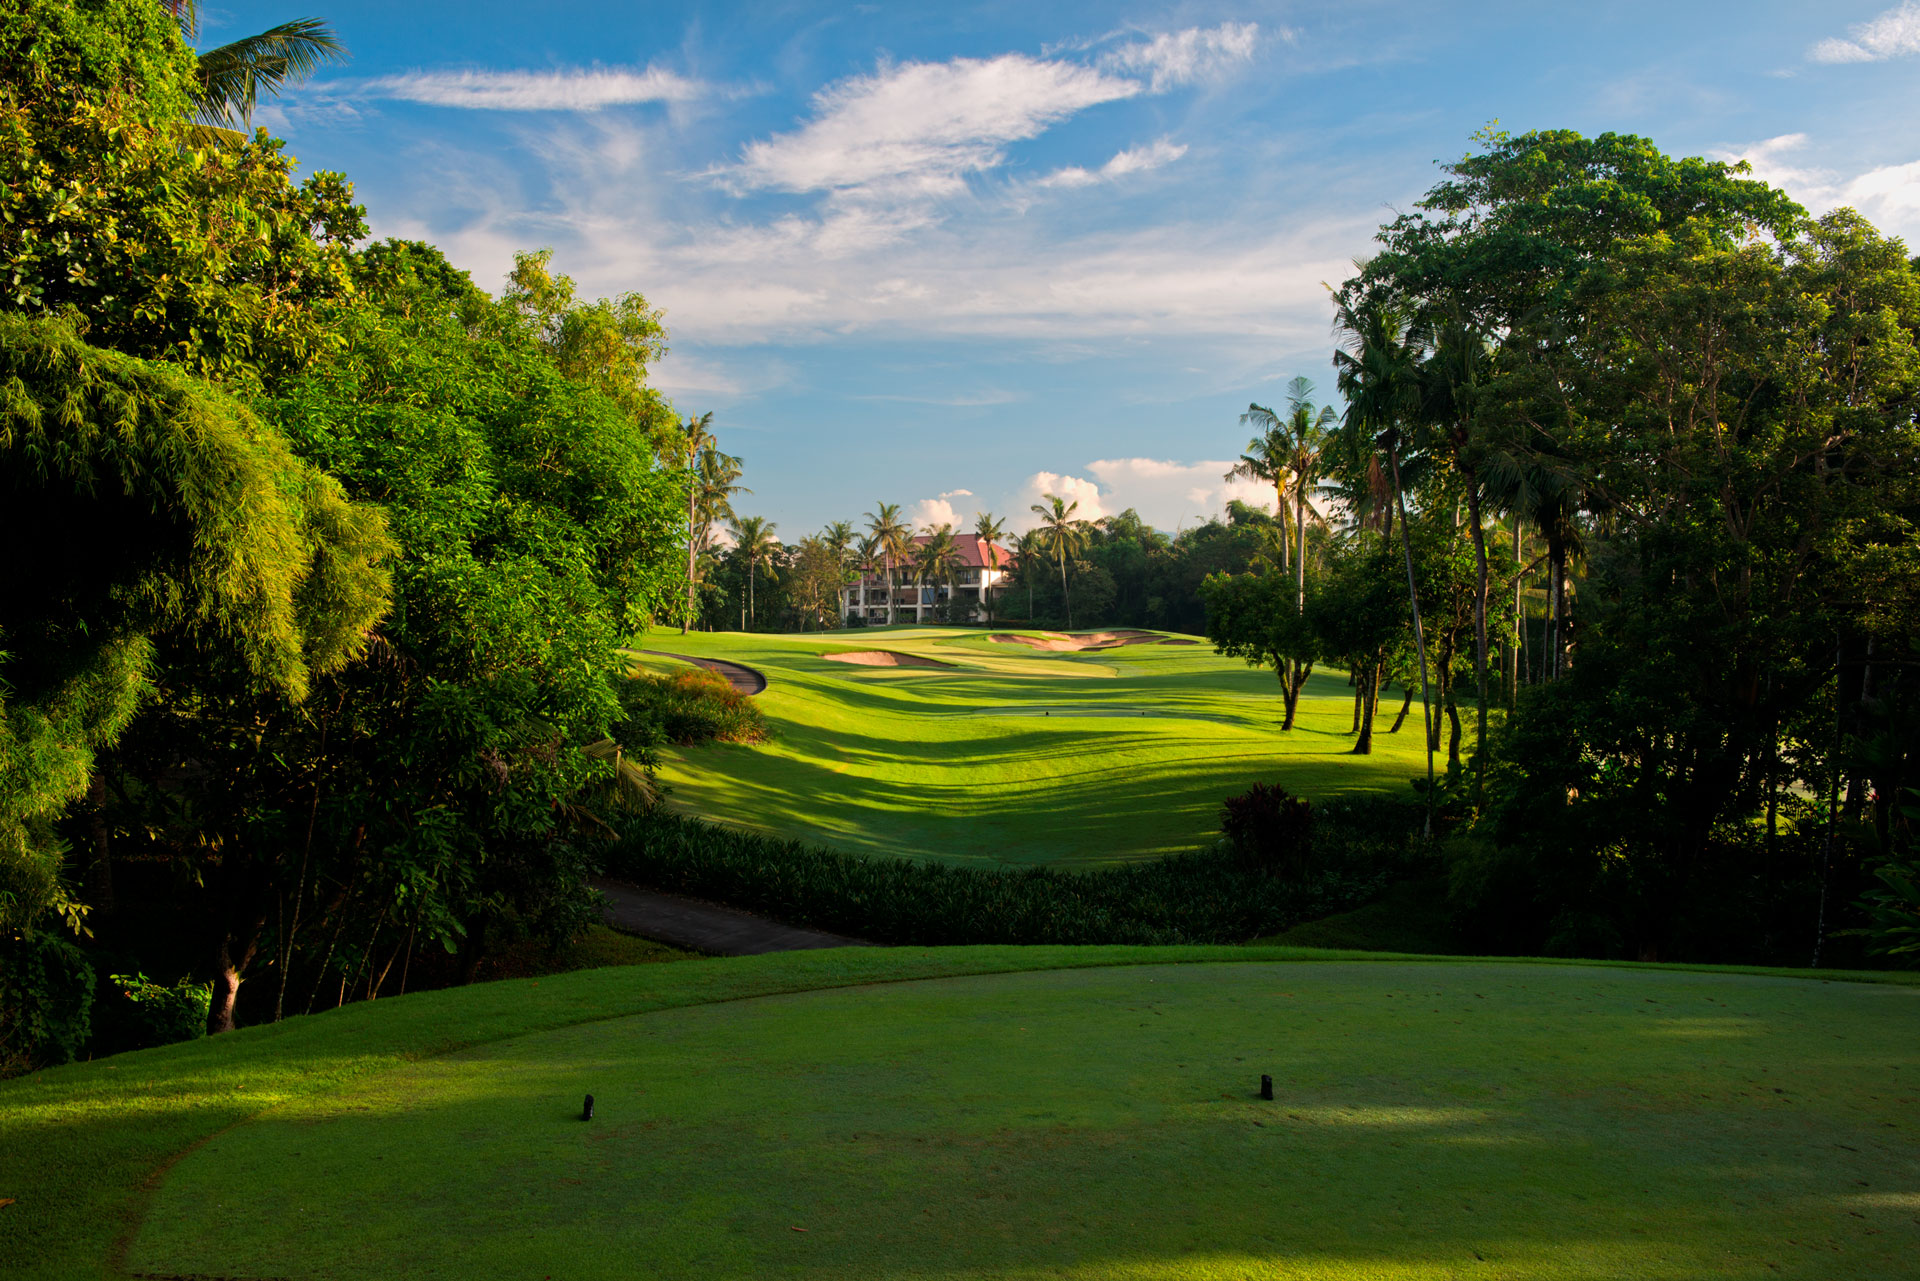 Bali Golf Course Bali National Bali Tours And More